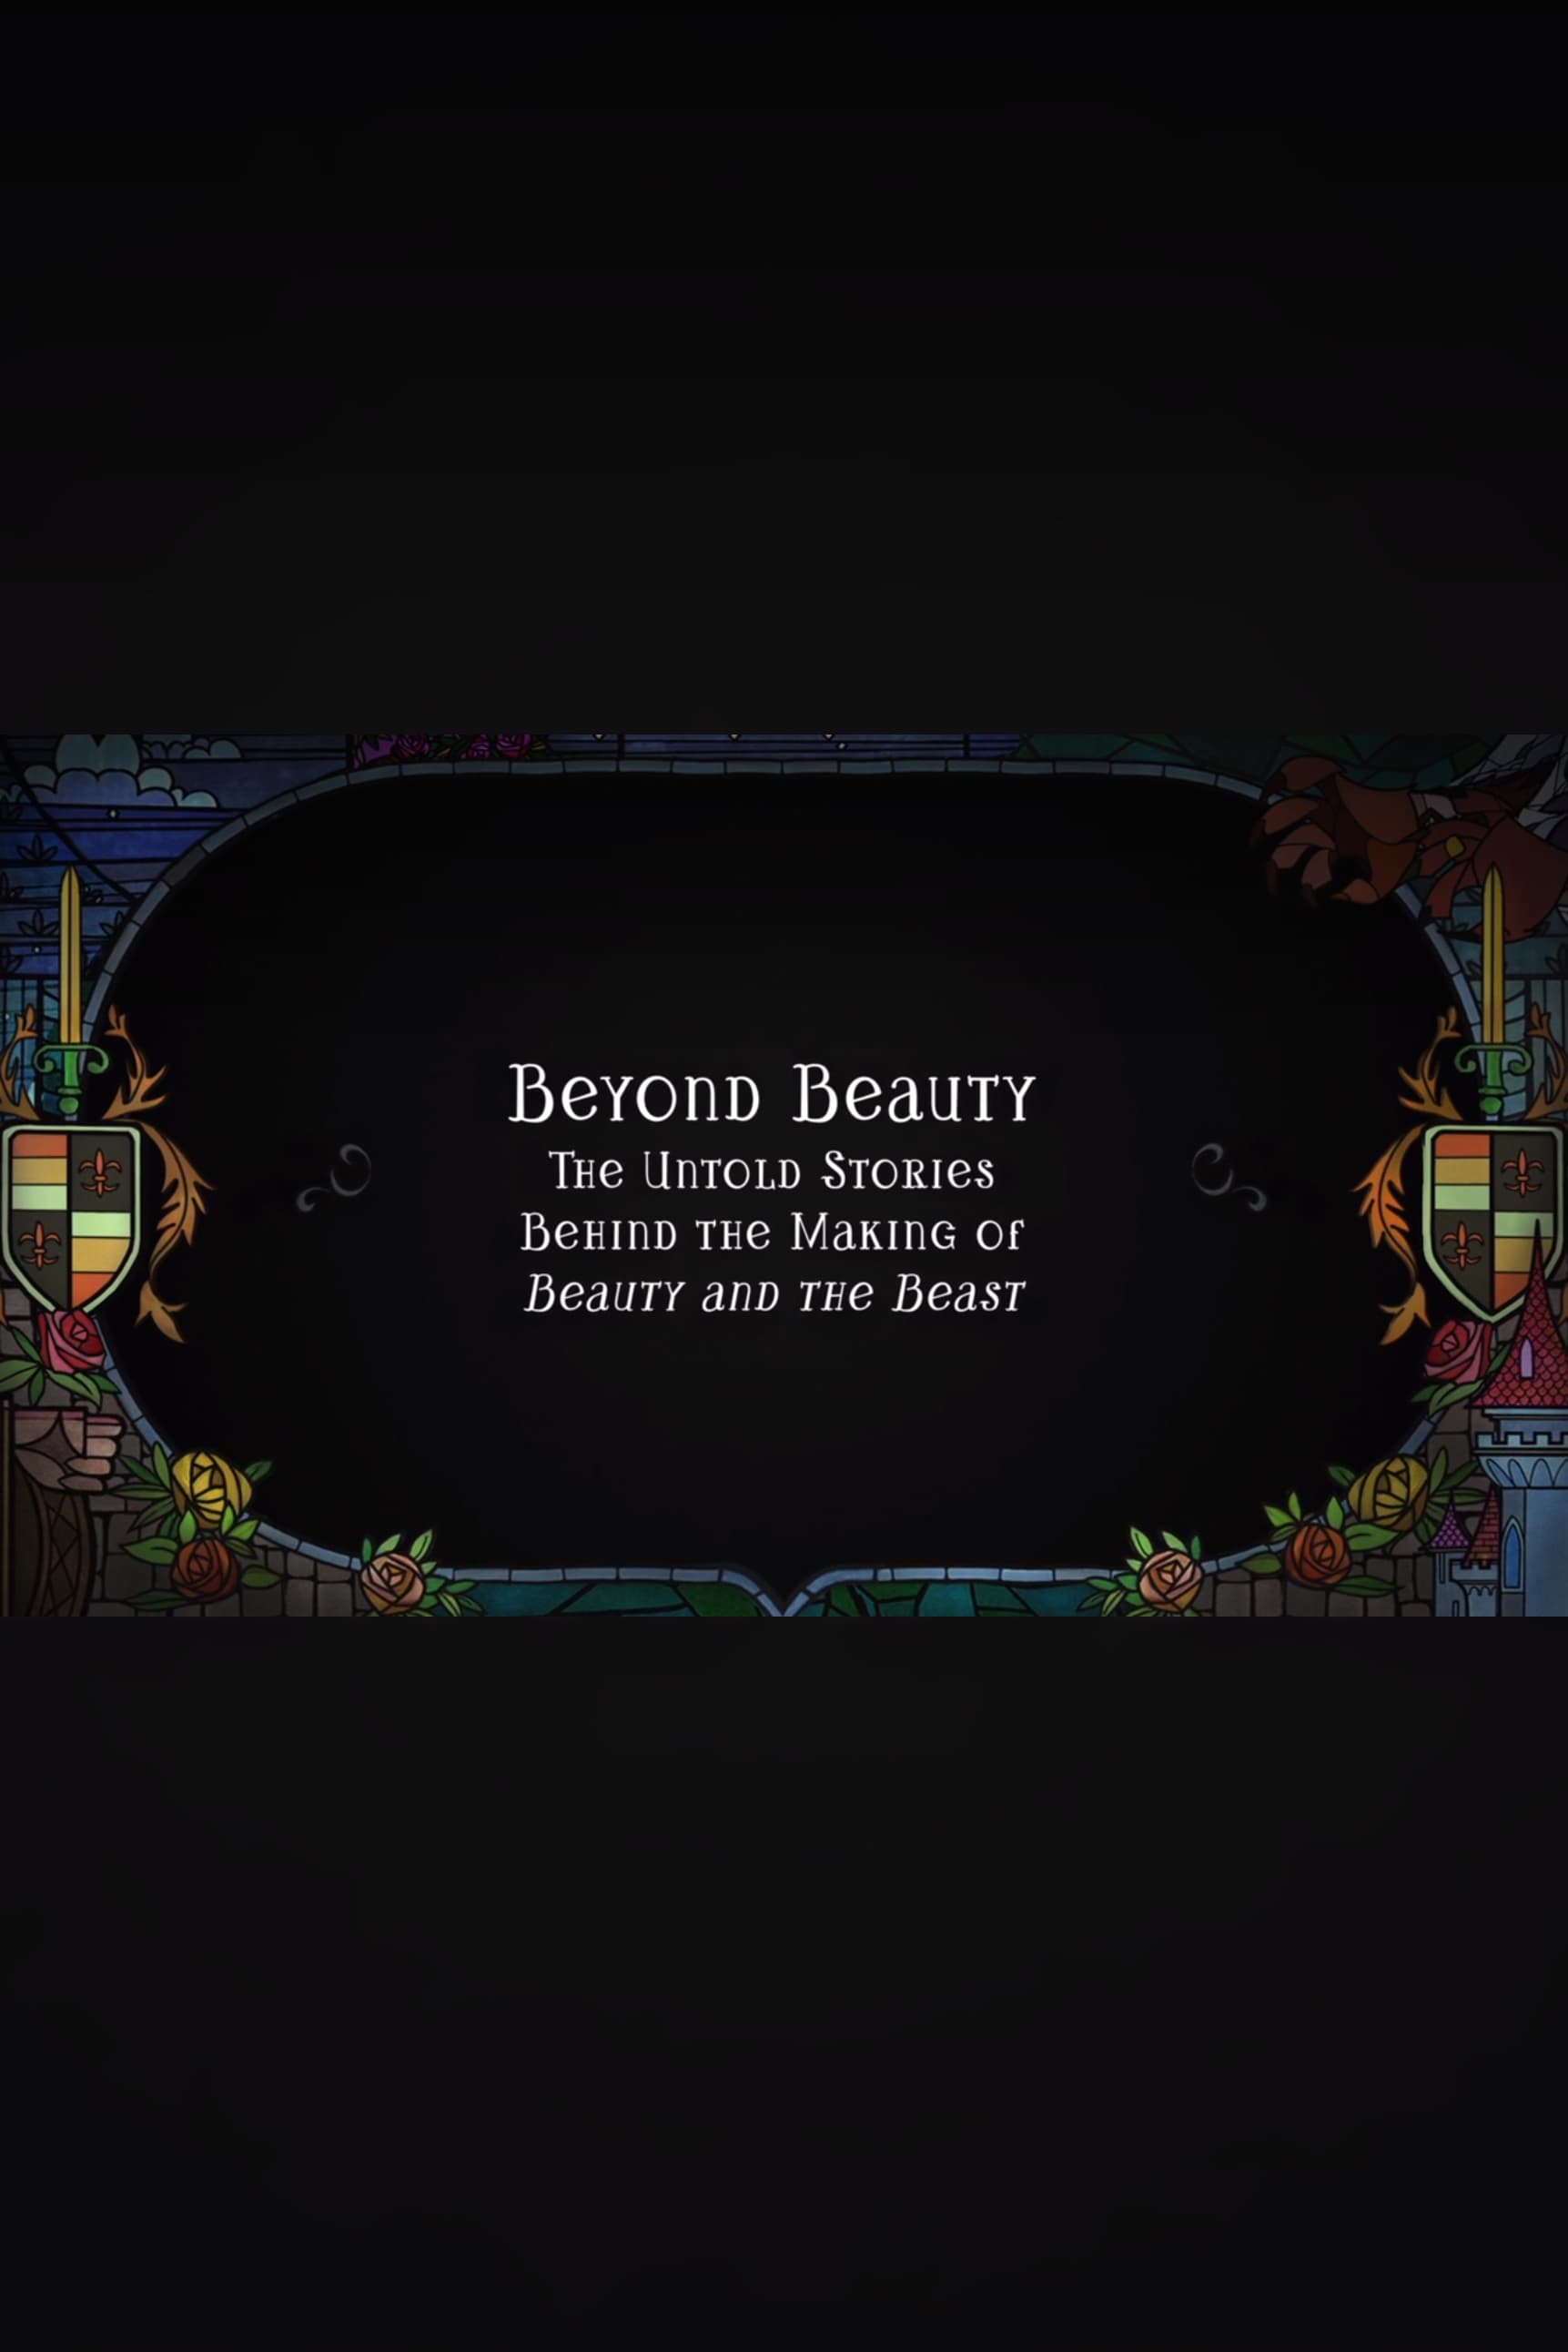 Beyond Beauty: The Untold Stories Behind the Making of Beauty and the Beast